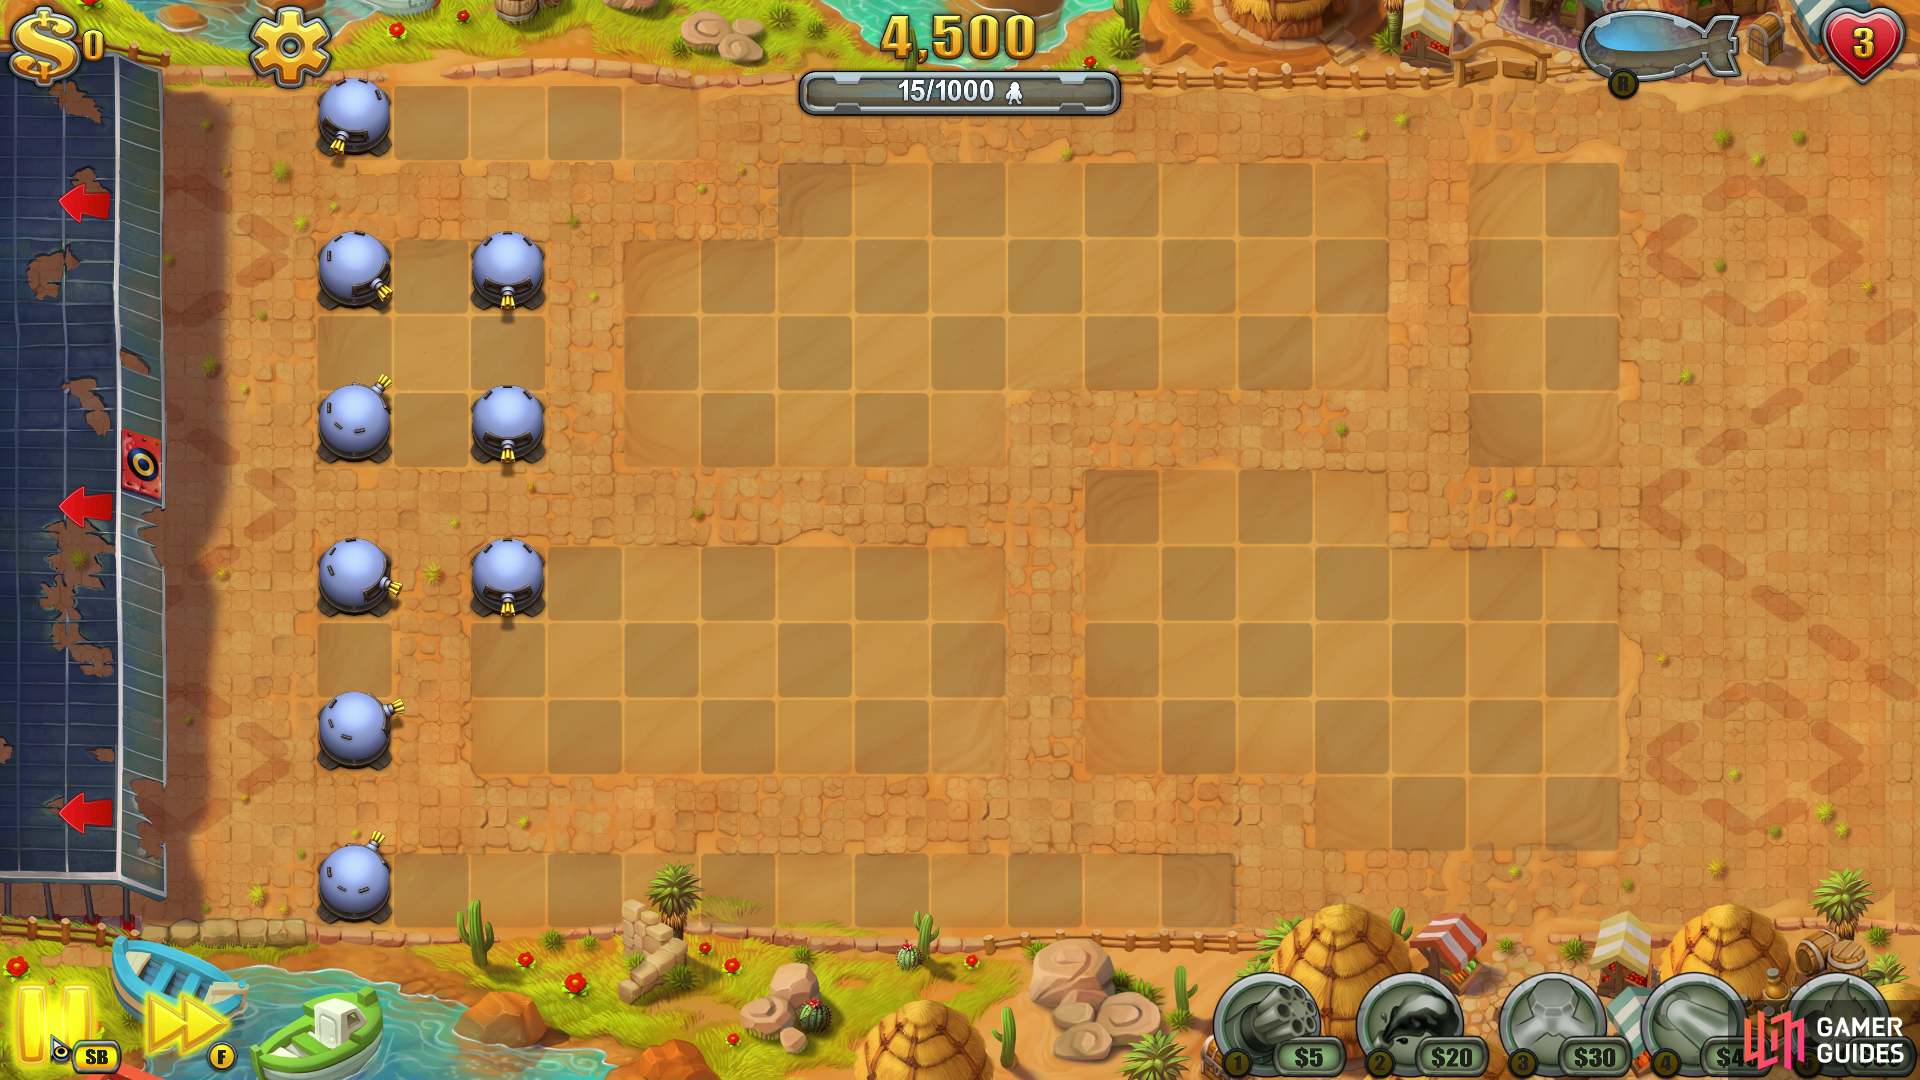 The key to this round is the spacing of your towers. Try not to bunch them too close together, otherwise they lose their effectiveness.